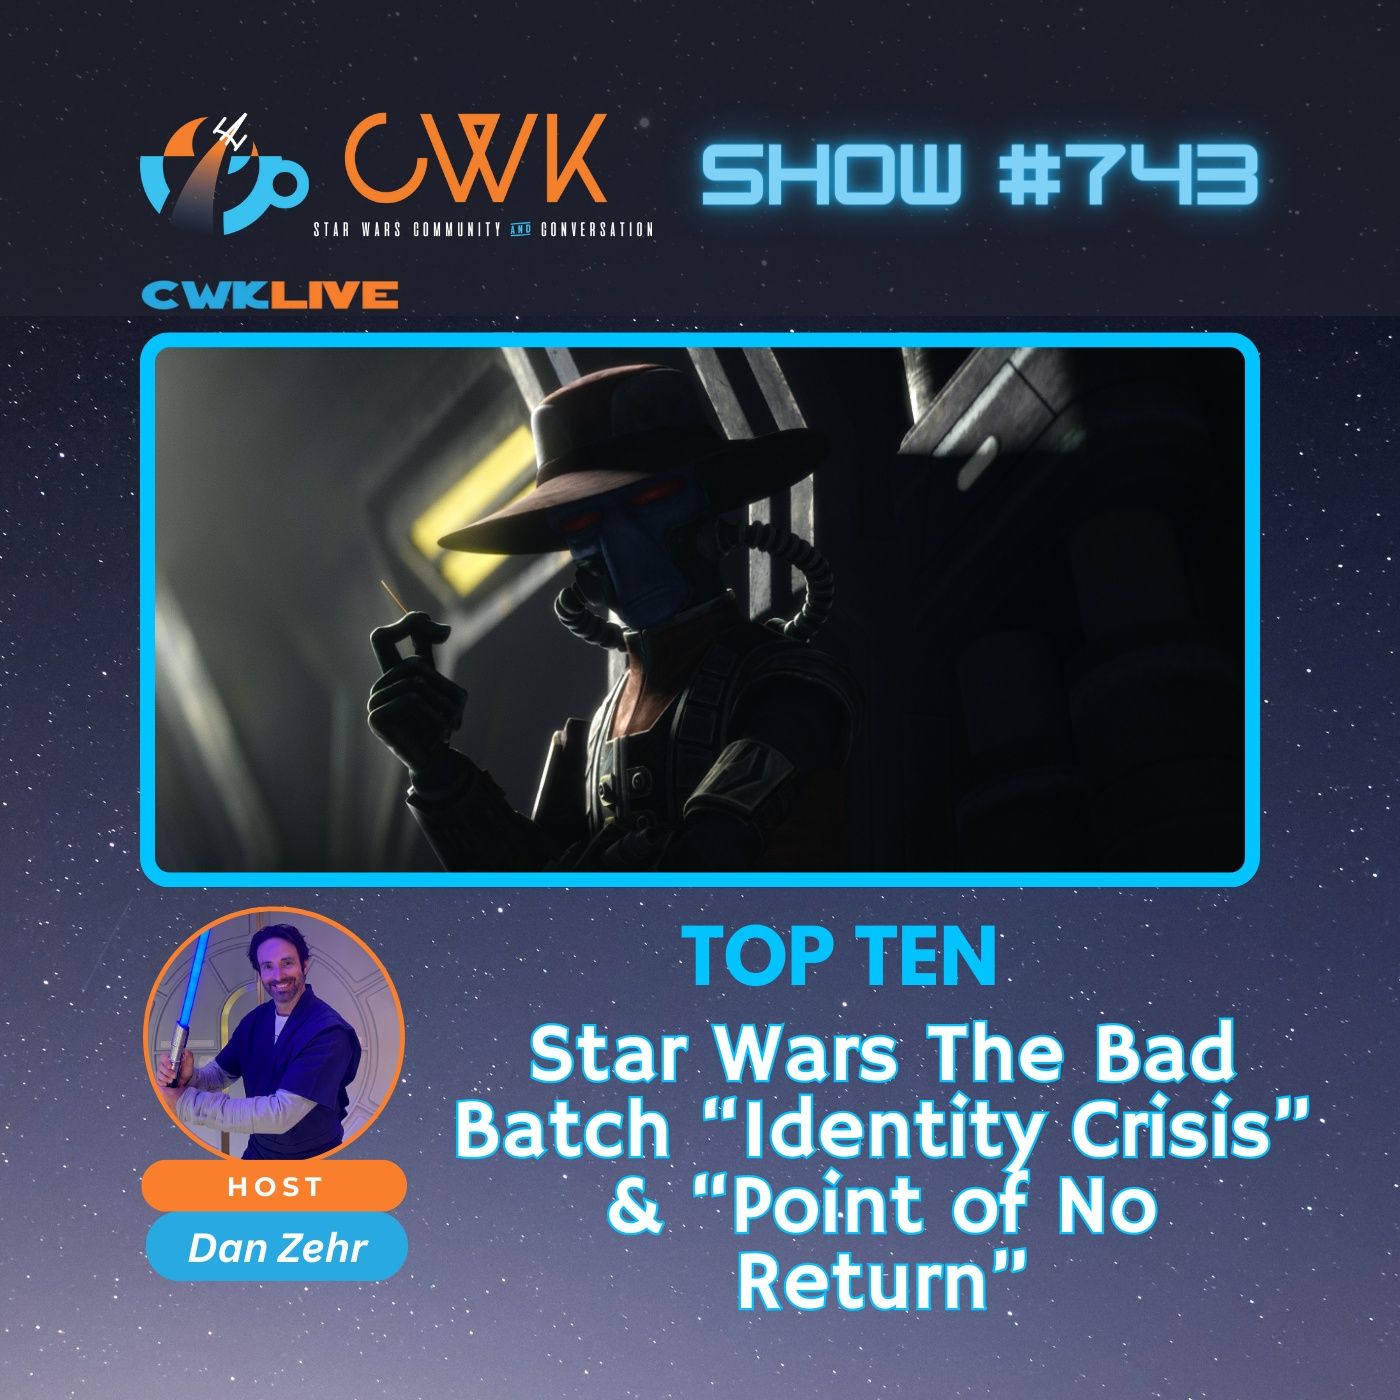 CWK Show #743 LIVE: Top Ten Moments from The Bad Batch "Identity Crisis" & "Point of No Return"